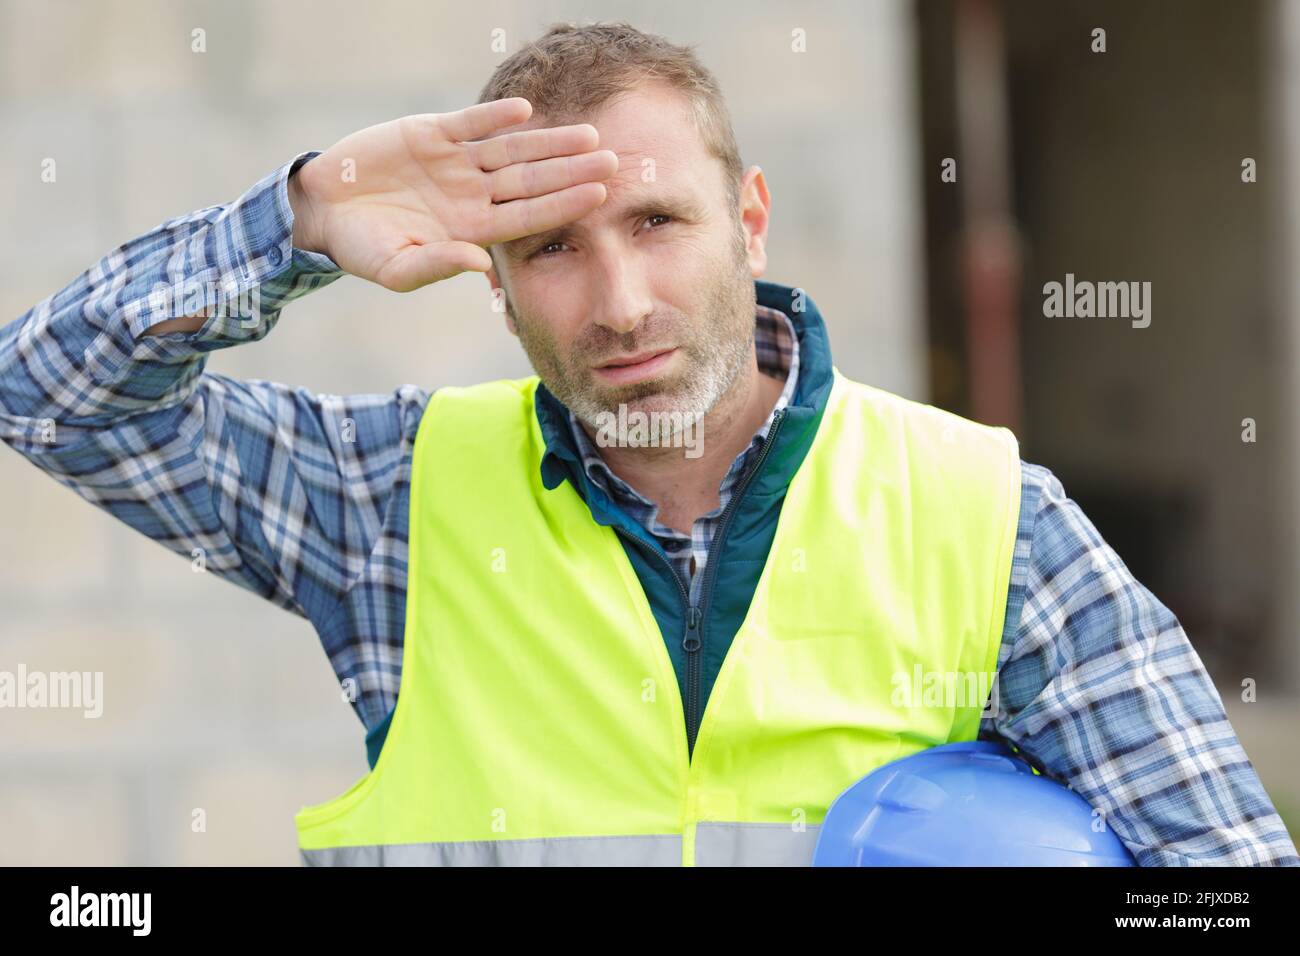 worker wipes the sweat from his forehead Stock Photo